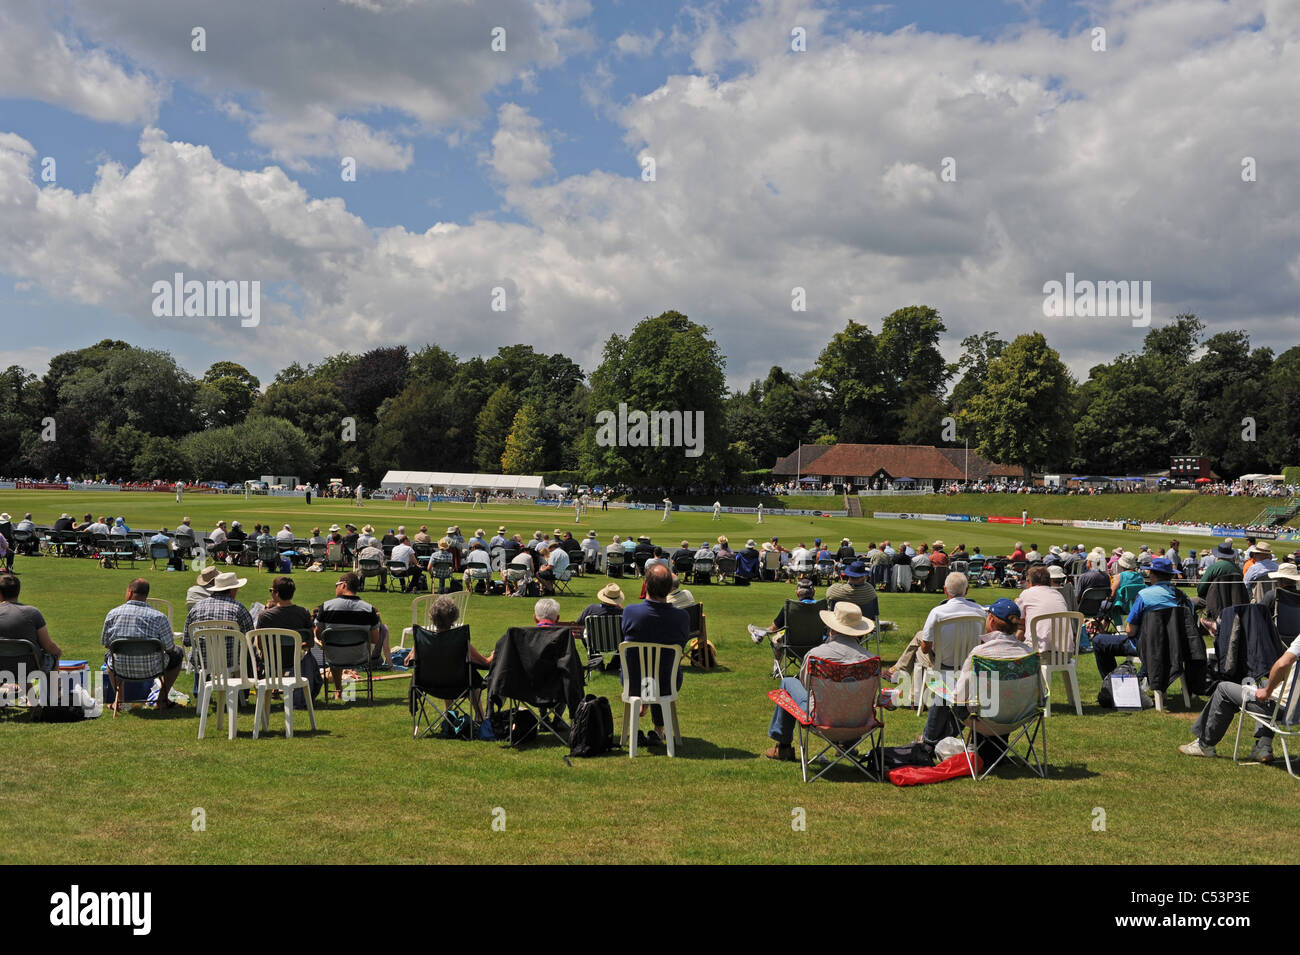 Sussex play against Warwickshire at the picturesque Arundel Castle cricket ground West Sussex UK Stock Photo